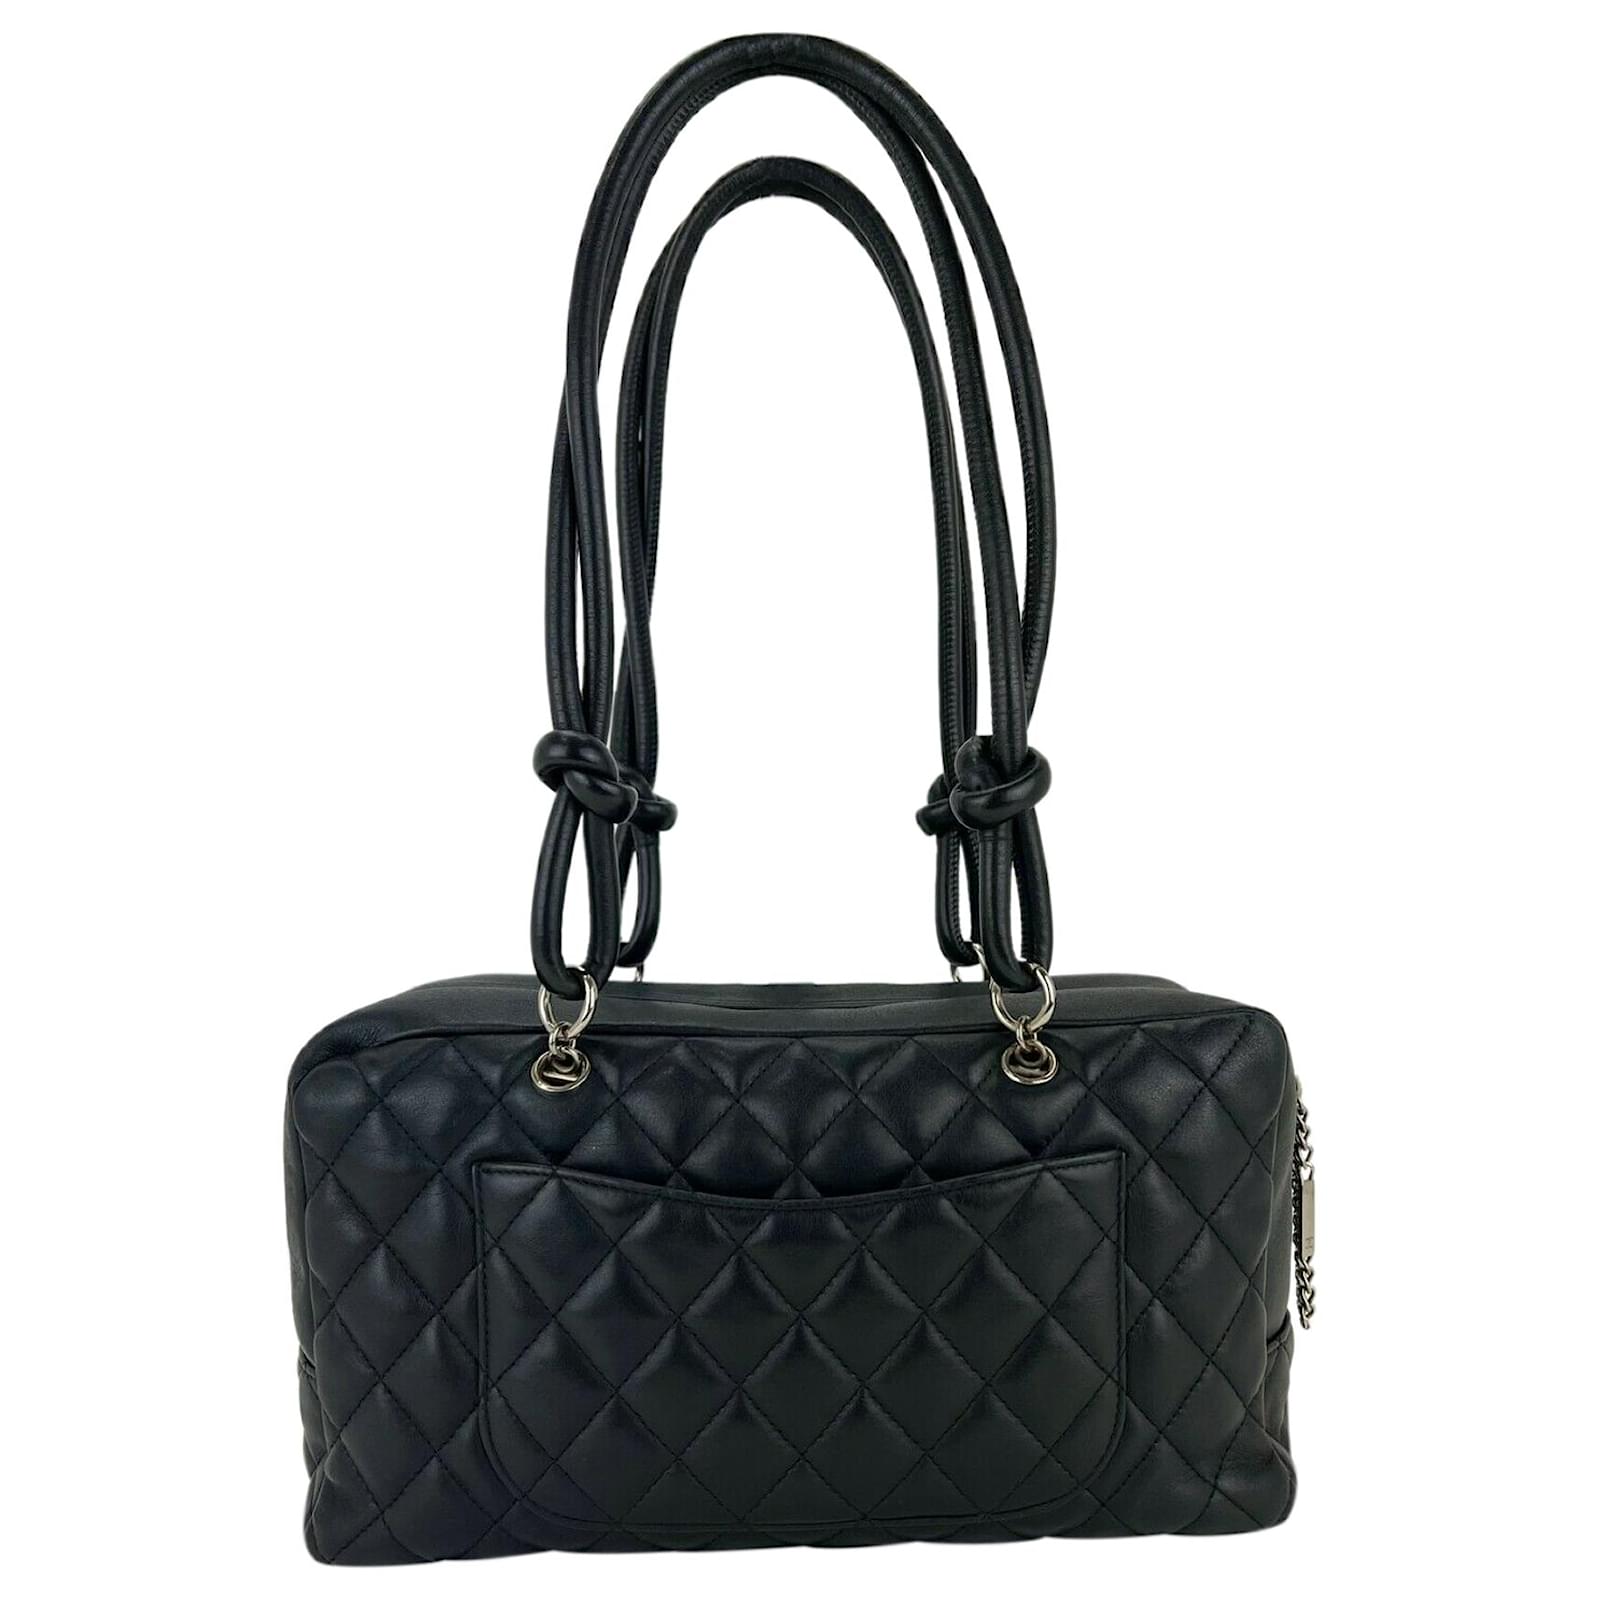 Chanel Handbag Large Cc Cambon Quilted Black Leather Bowler